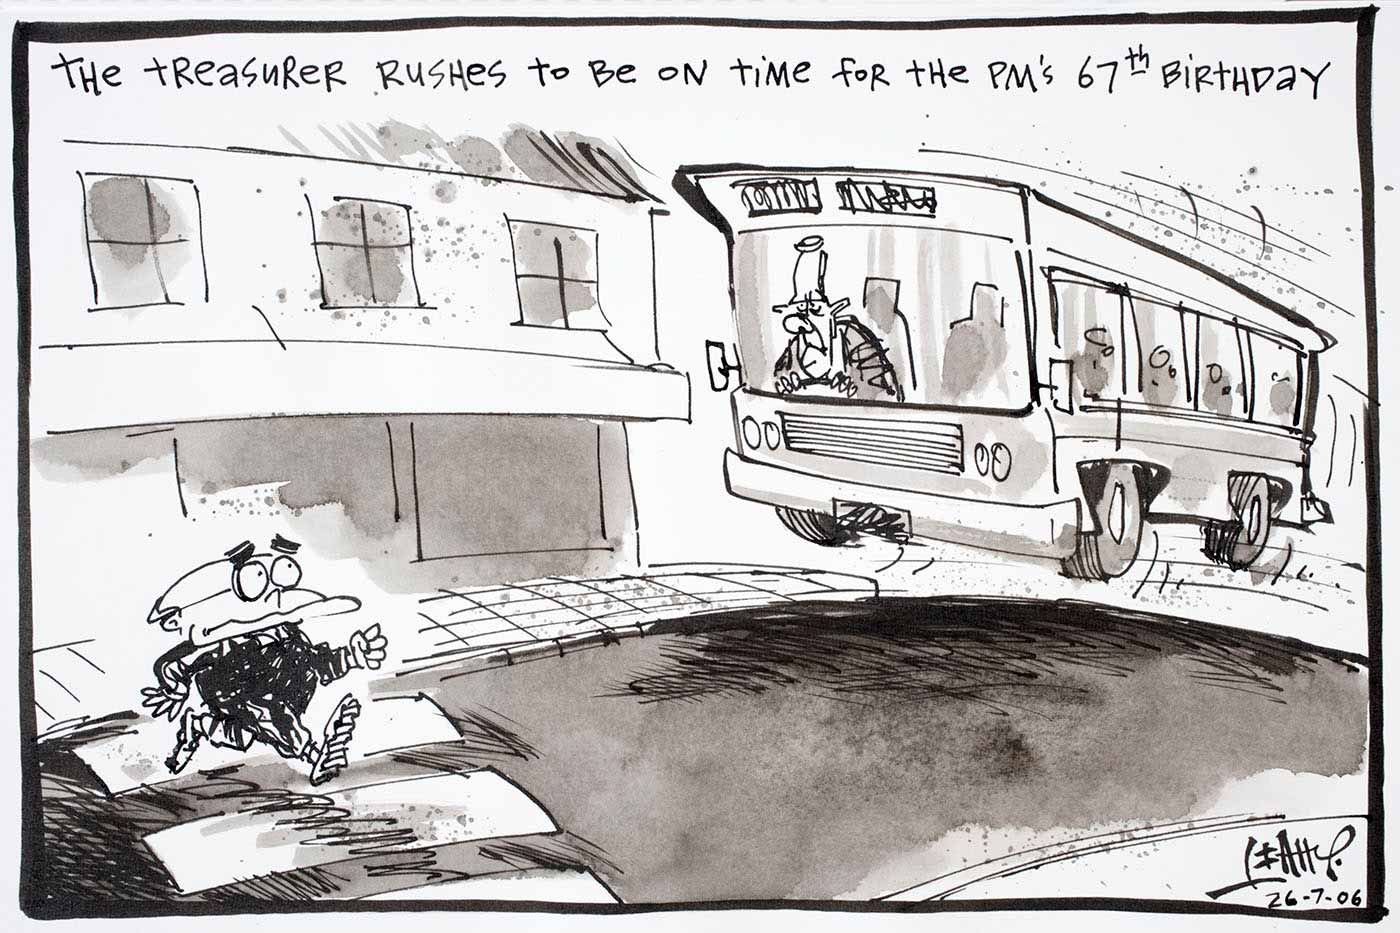 Cartoon of Peter Costello driving a bus very fast trying to be on time for the Prime Minister's 67th birthday. Ahead of him is John Howard walking across a pedestrian crossing. - click to view larger image